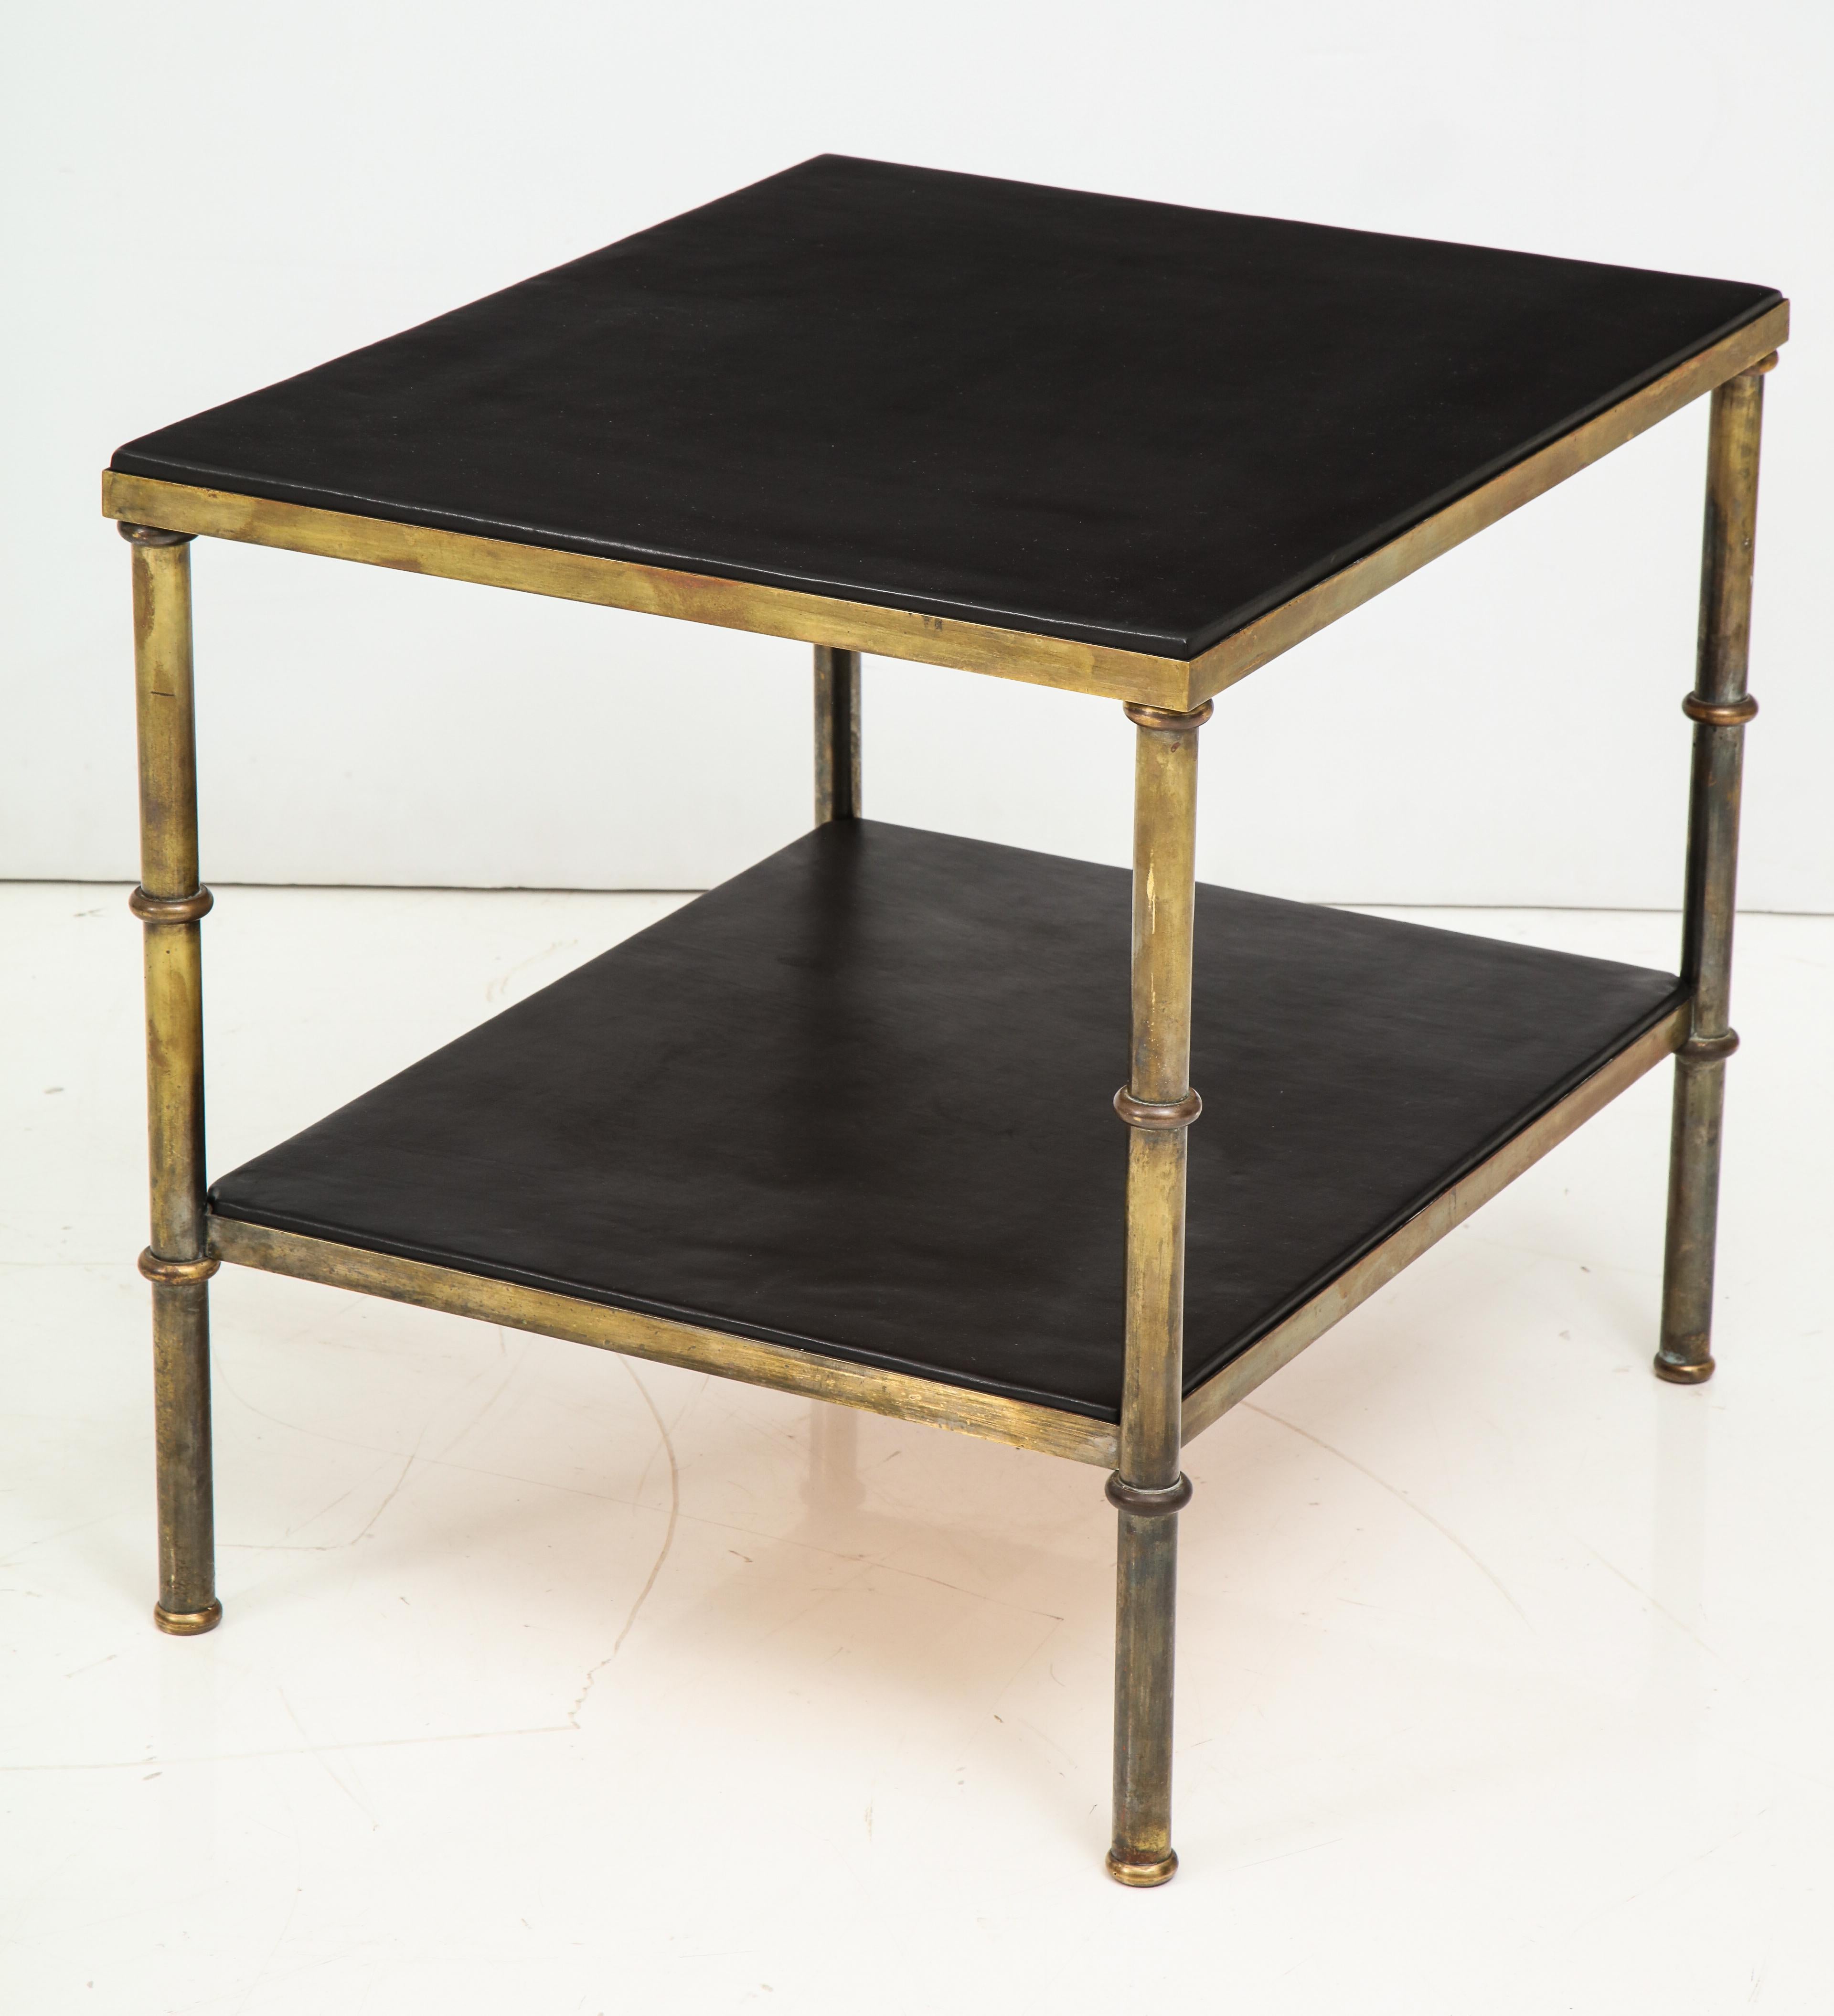 Patinated Minimalist Solid Bronze and Leather Occasional Table, France, 1940s